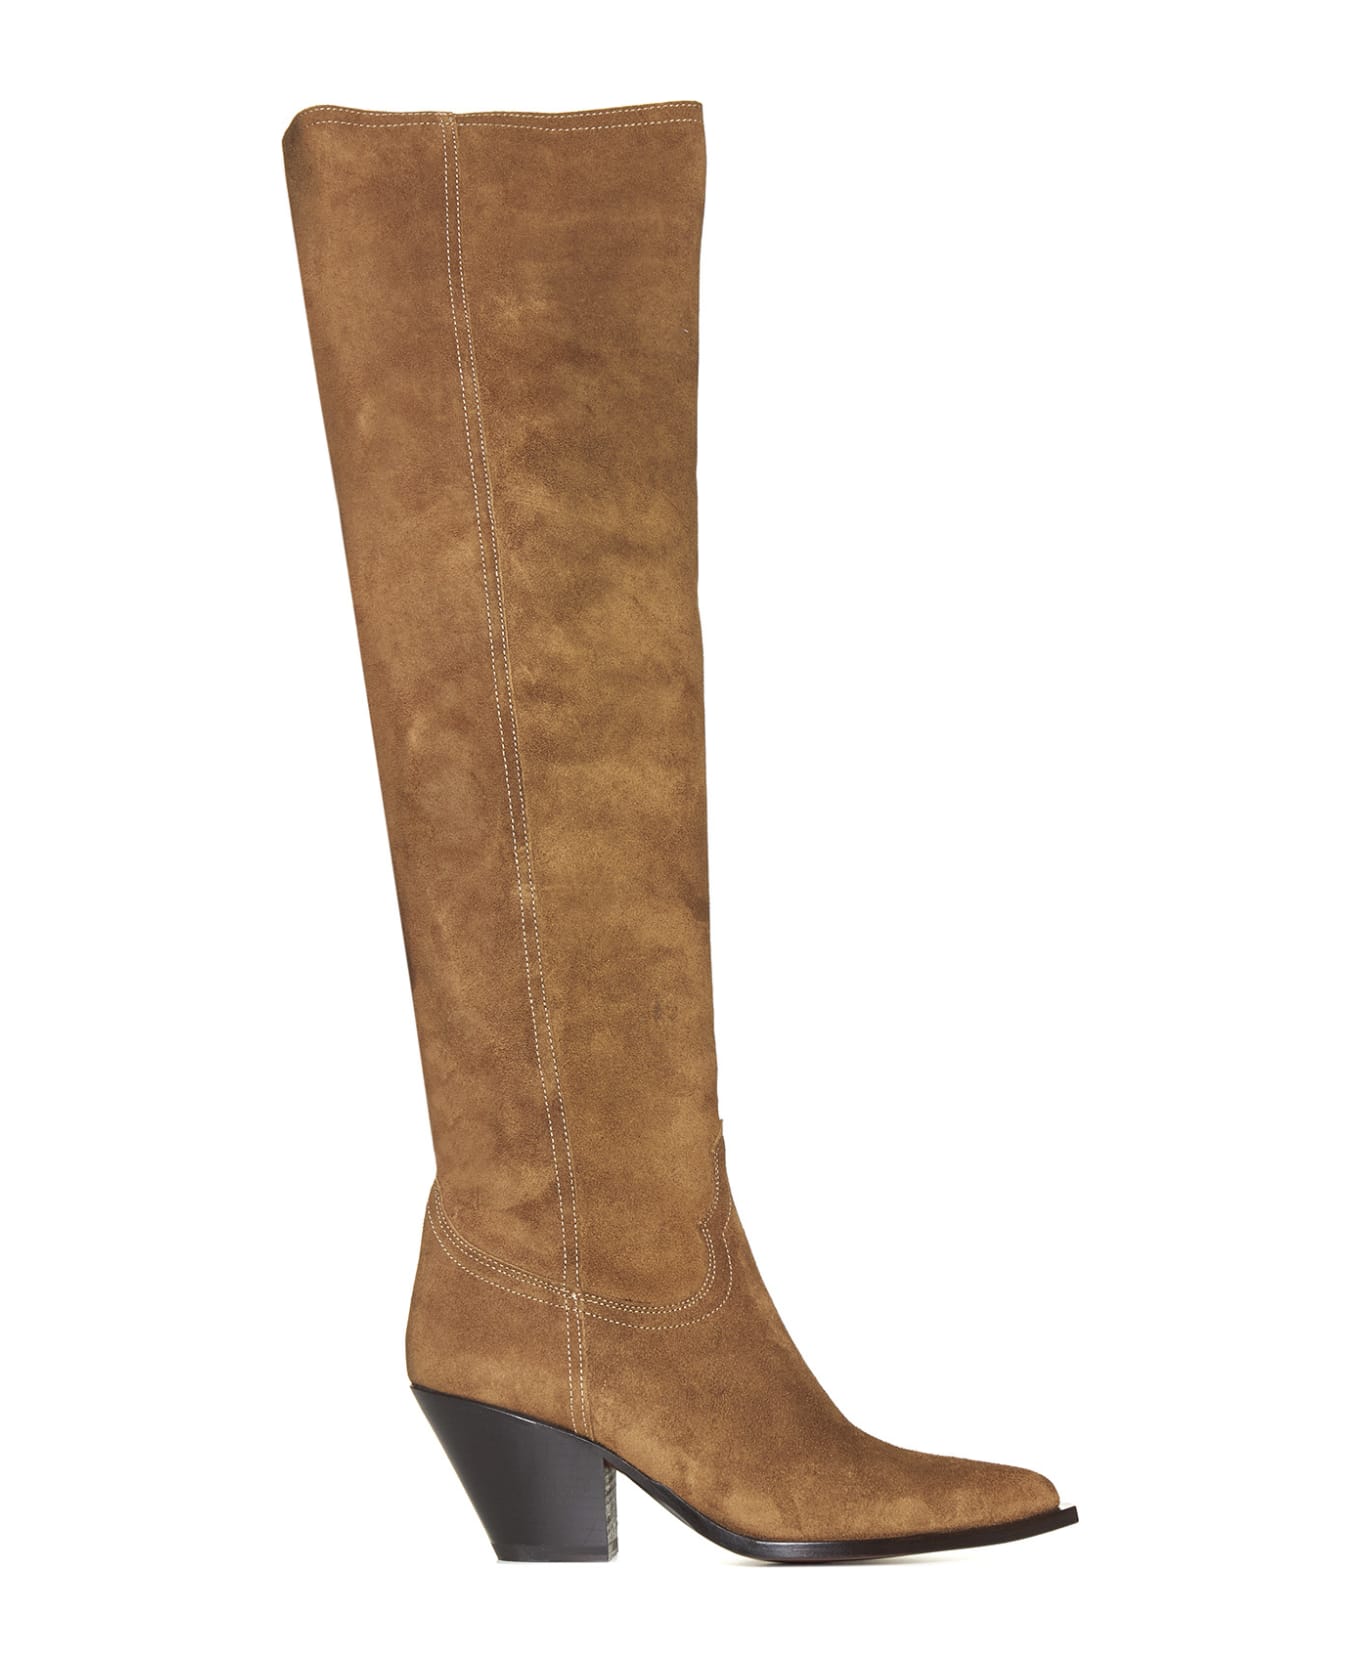 Sonora Acapulco Over-the-knee Boots - CIGAR